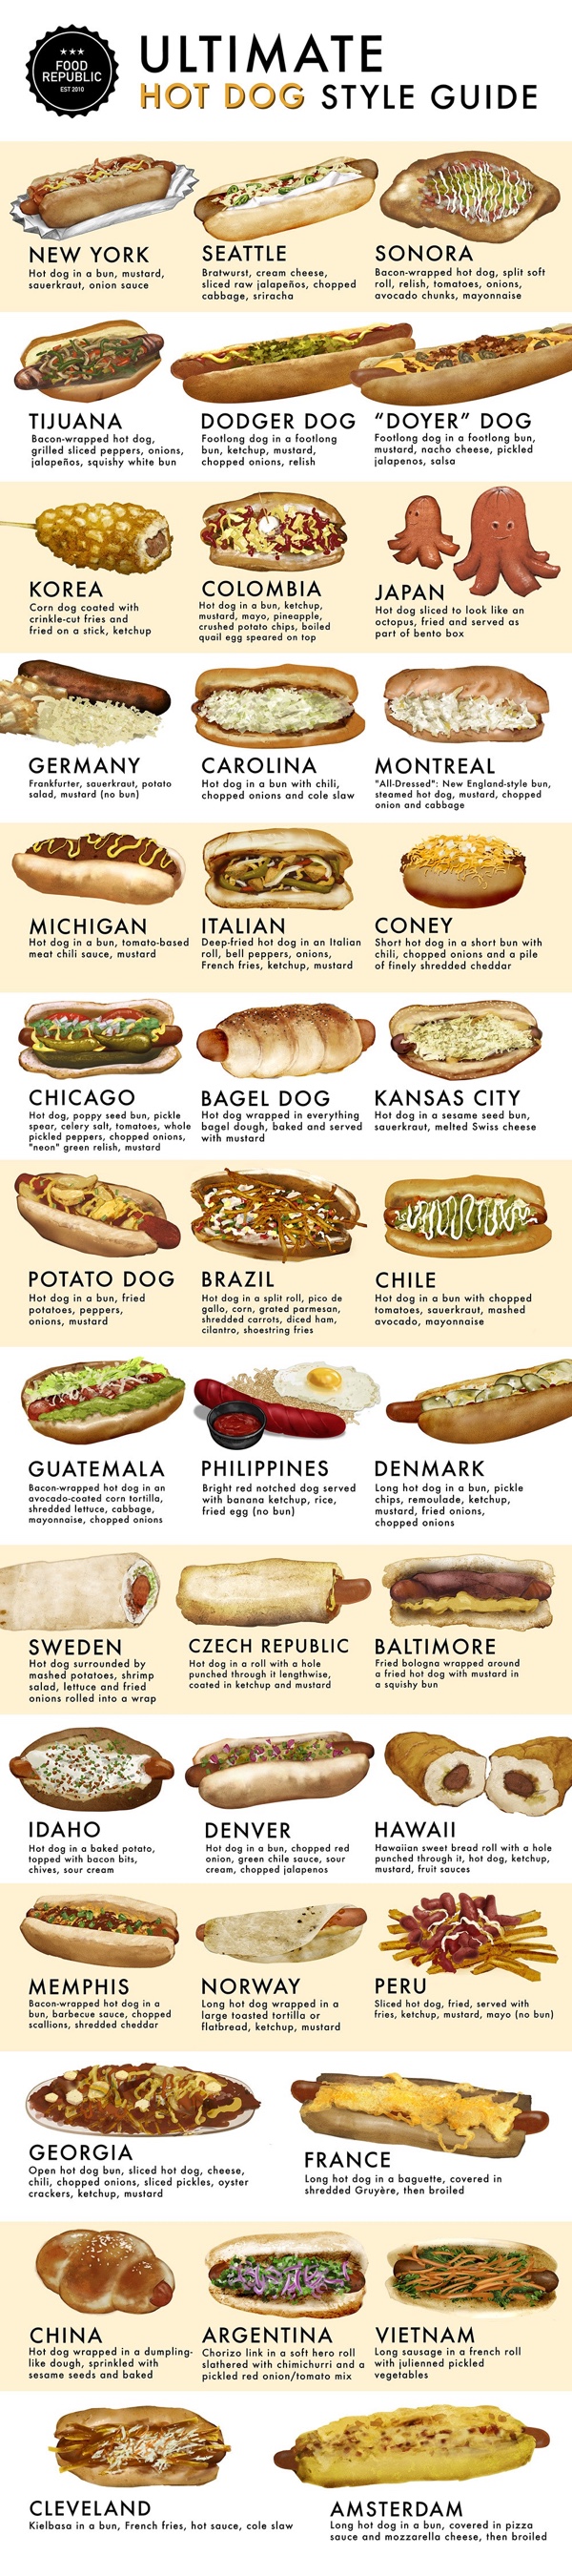 The Ultimate Hot Dog Style Guide infographic